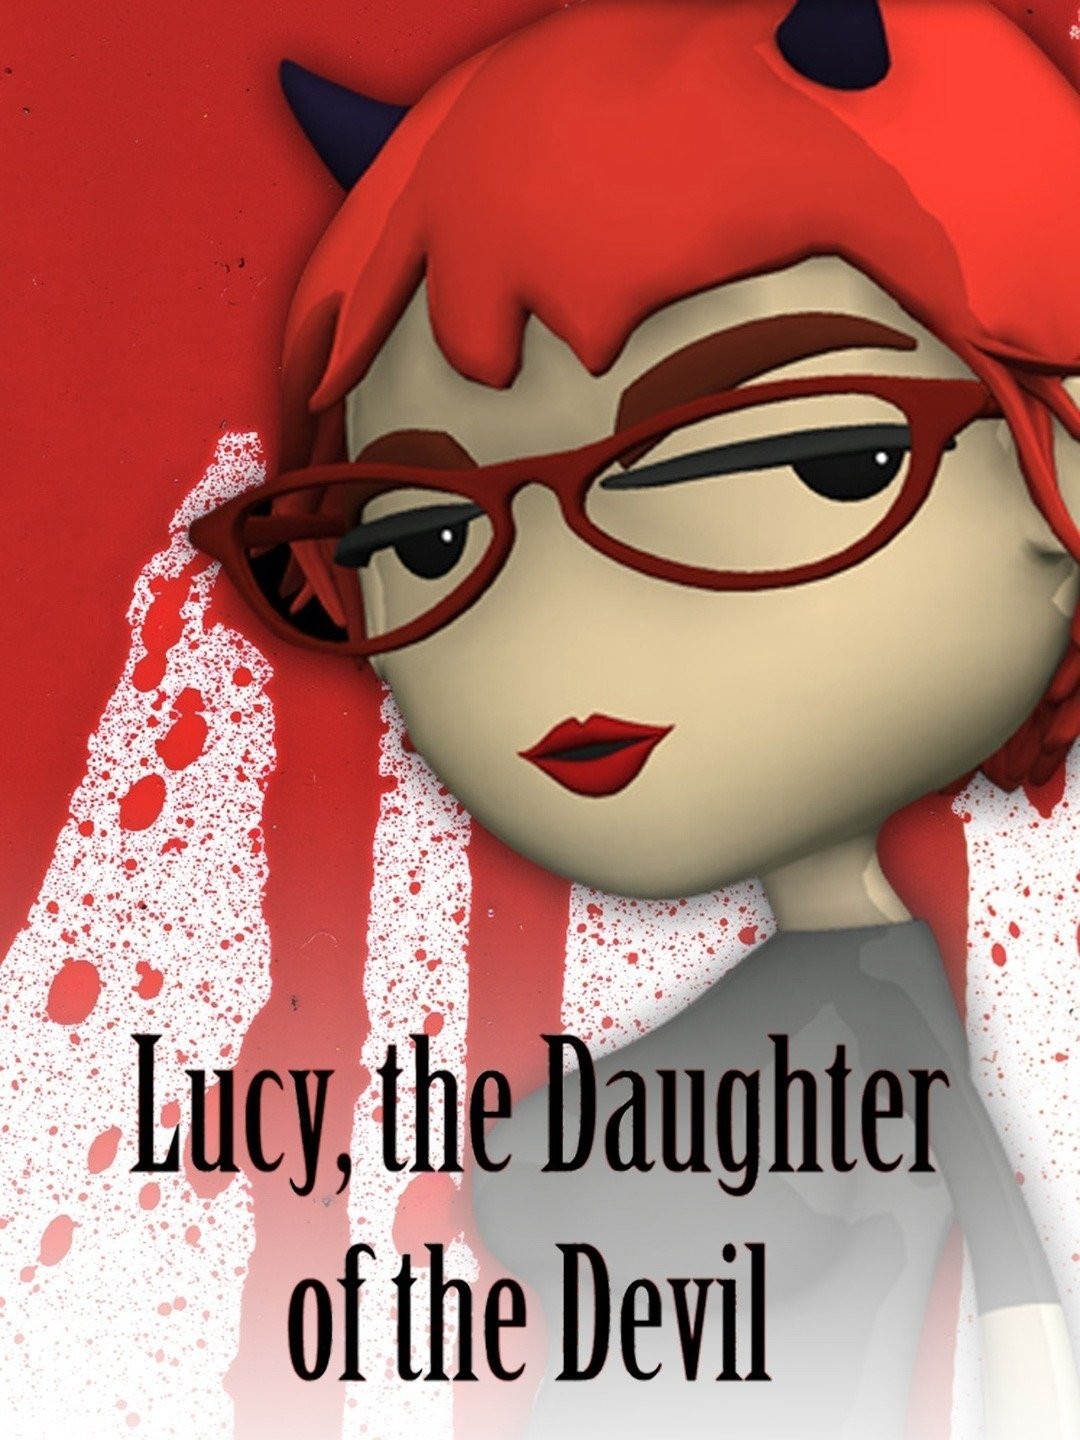 Best of Lucy the daughter of the devil